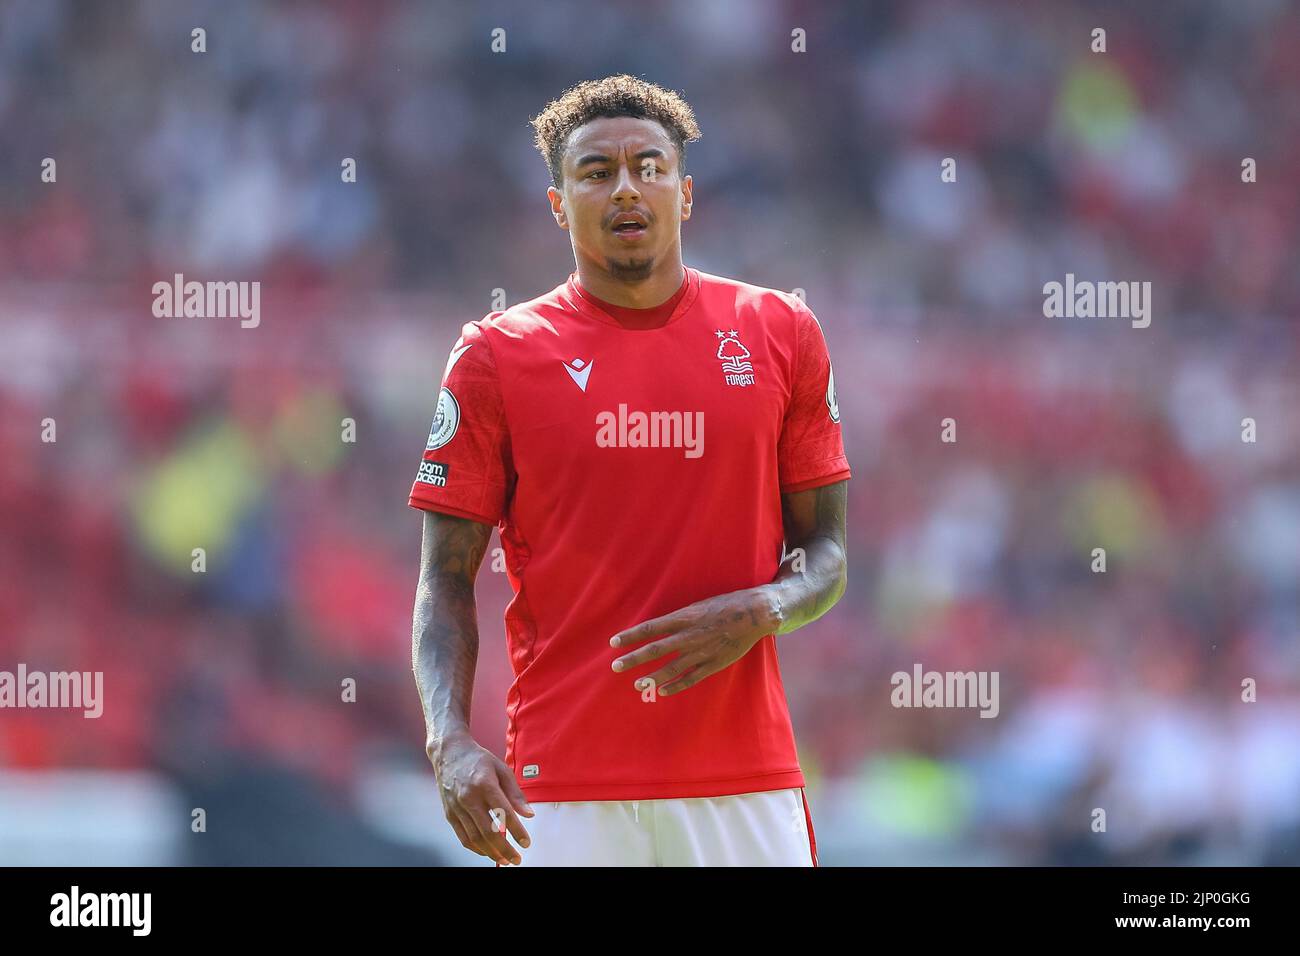 Jesse Lingard #11 of Nottingham Forest during the game Stock Photo